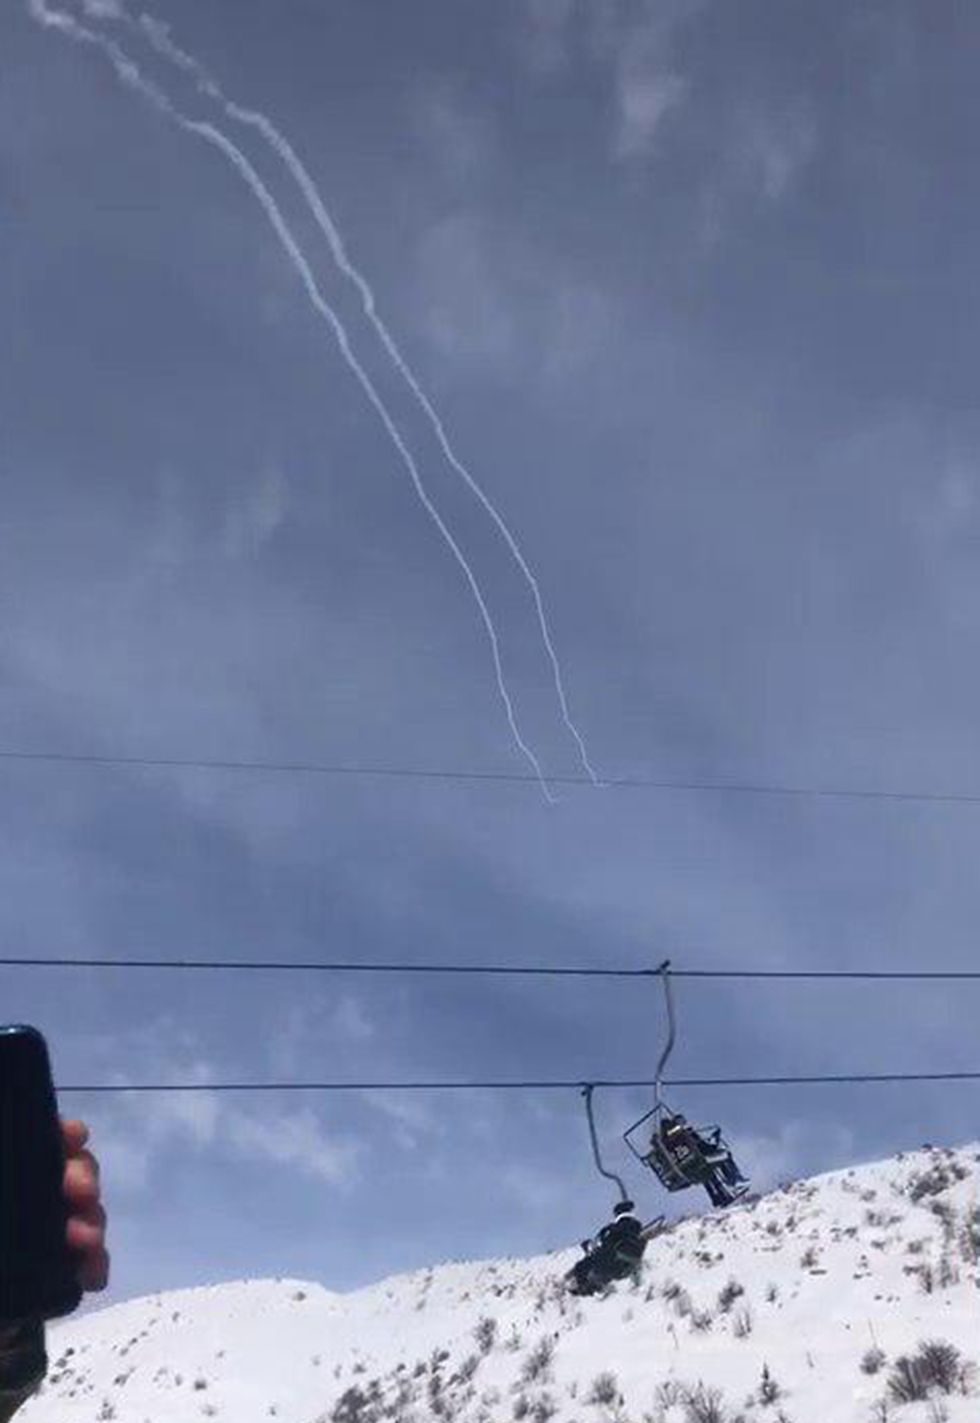 Israel's Iron Dome missile defense system fells rockets over the Golan Heights (Photo: Yossi Amar)